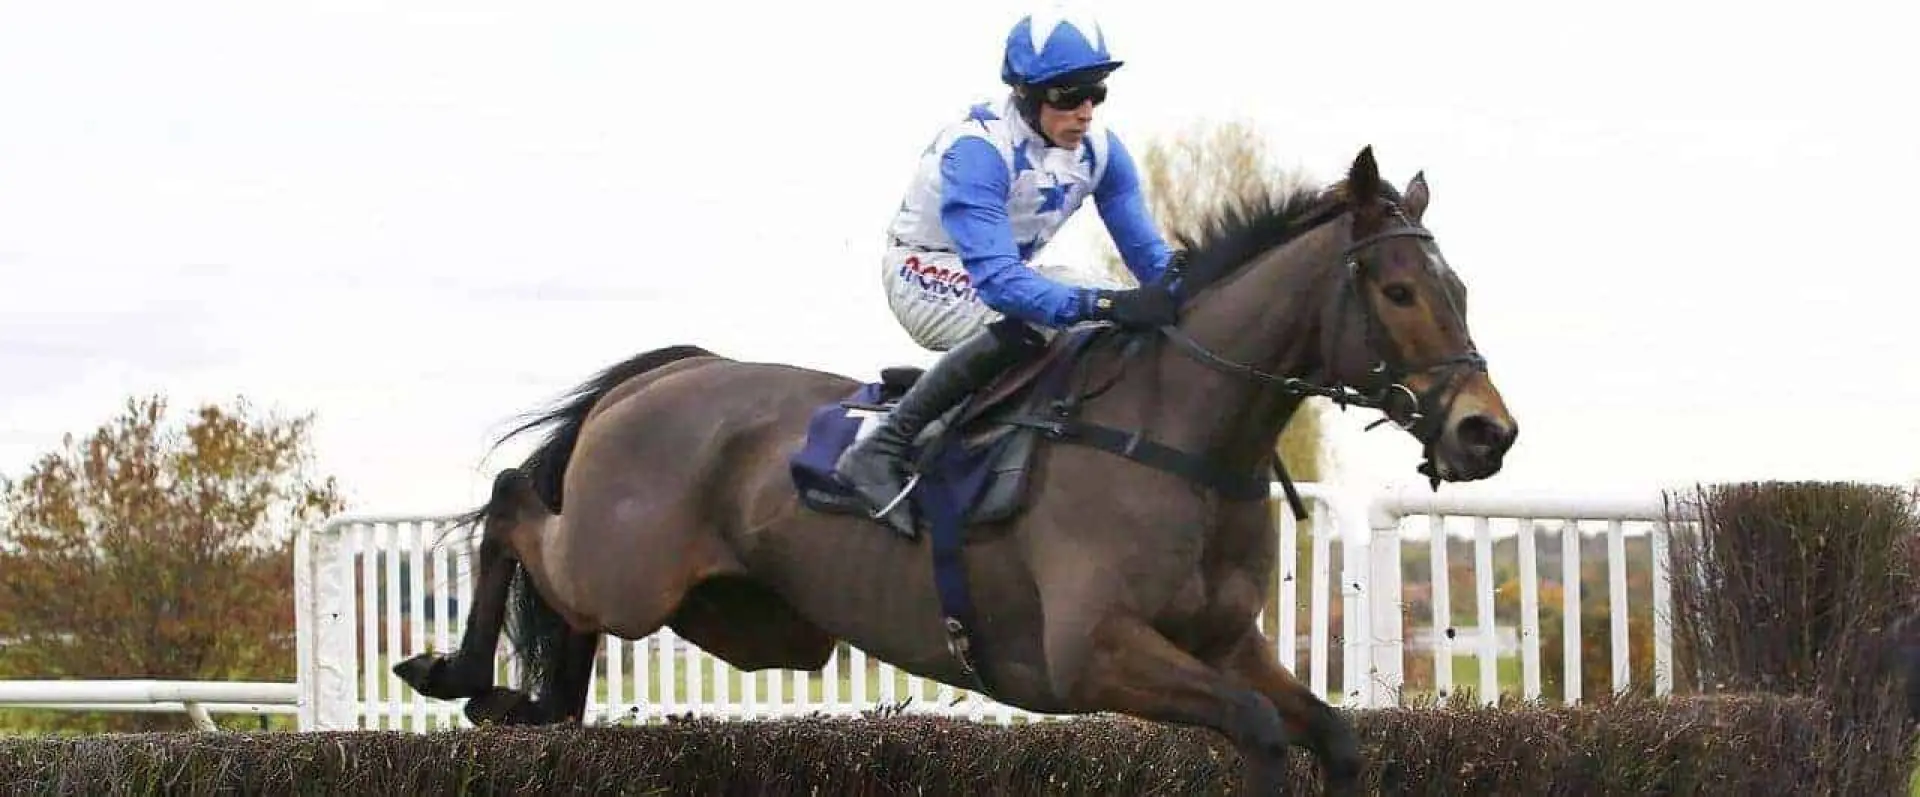 Churchtown Champ runs for the Coral Champions Club and Dan Skelton in the Kauto Star Novices' Chase on Boxing Day.